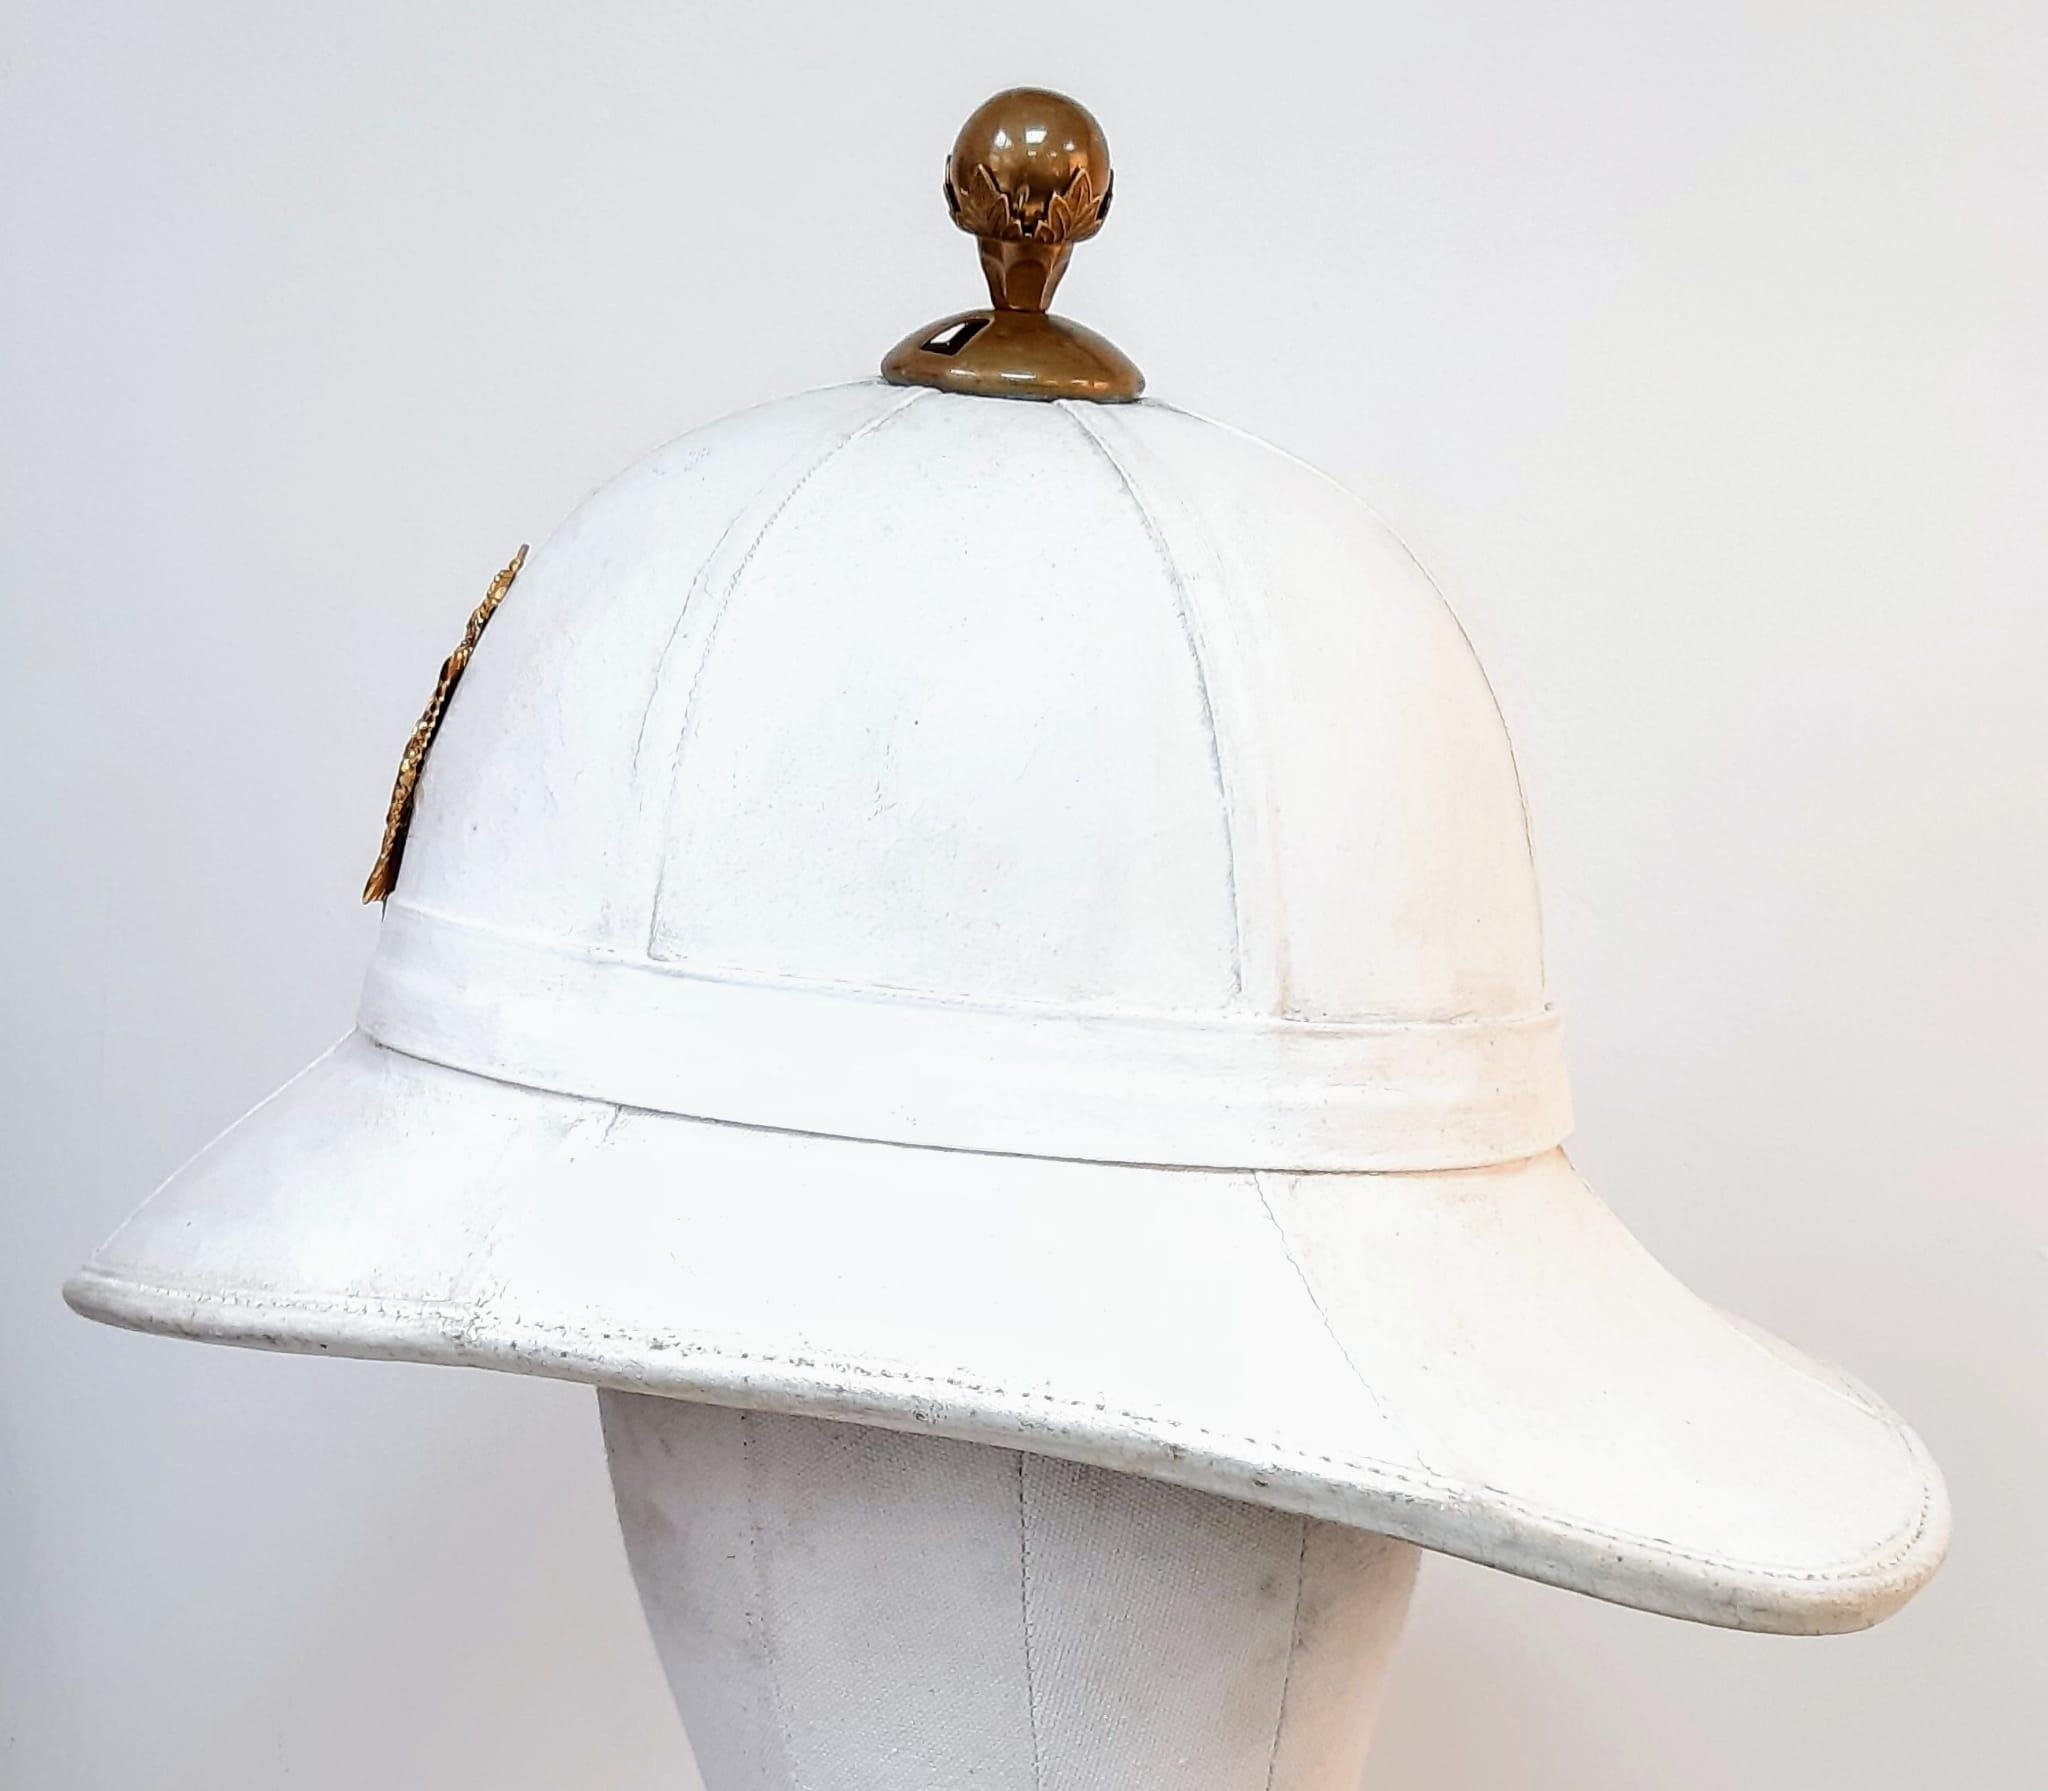 Royal Marines Band Other Ranks Wolseley Pith Helmet with Badge of Queen Elizabeth II (1952-2022). - Image 2 of 5